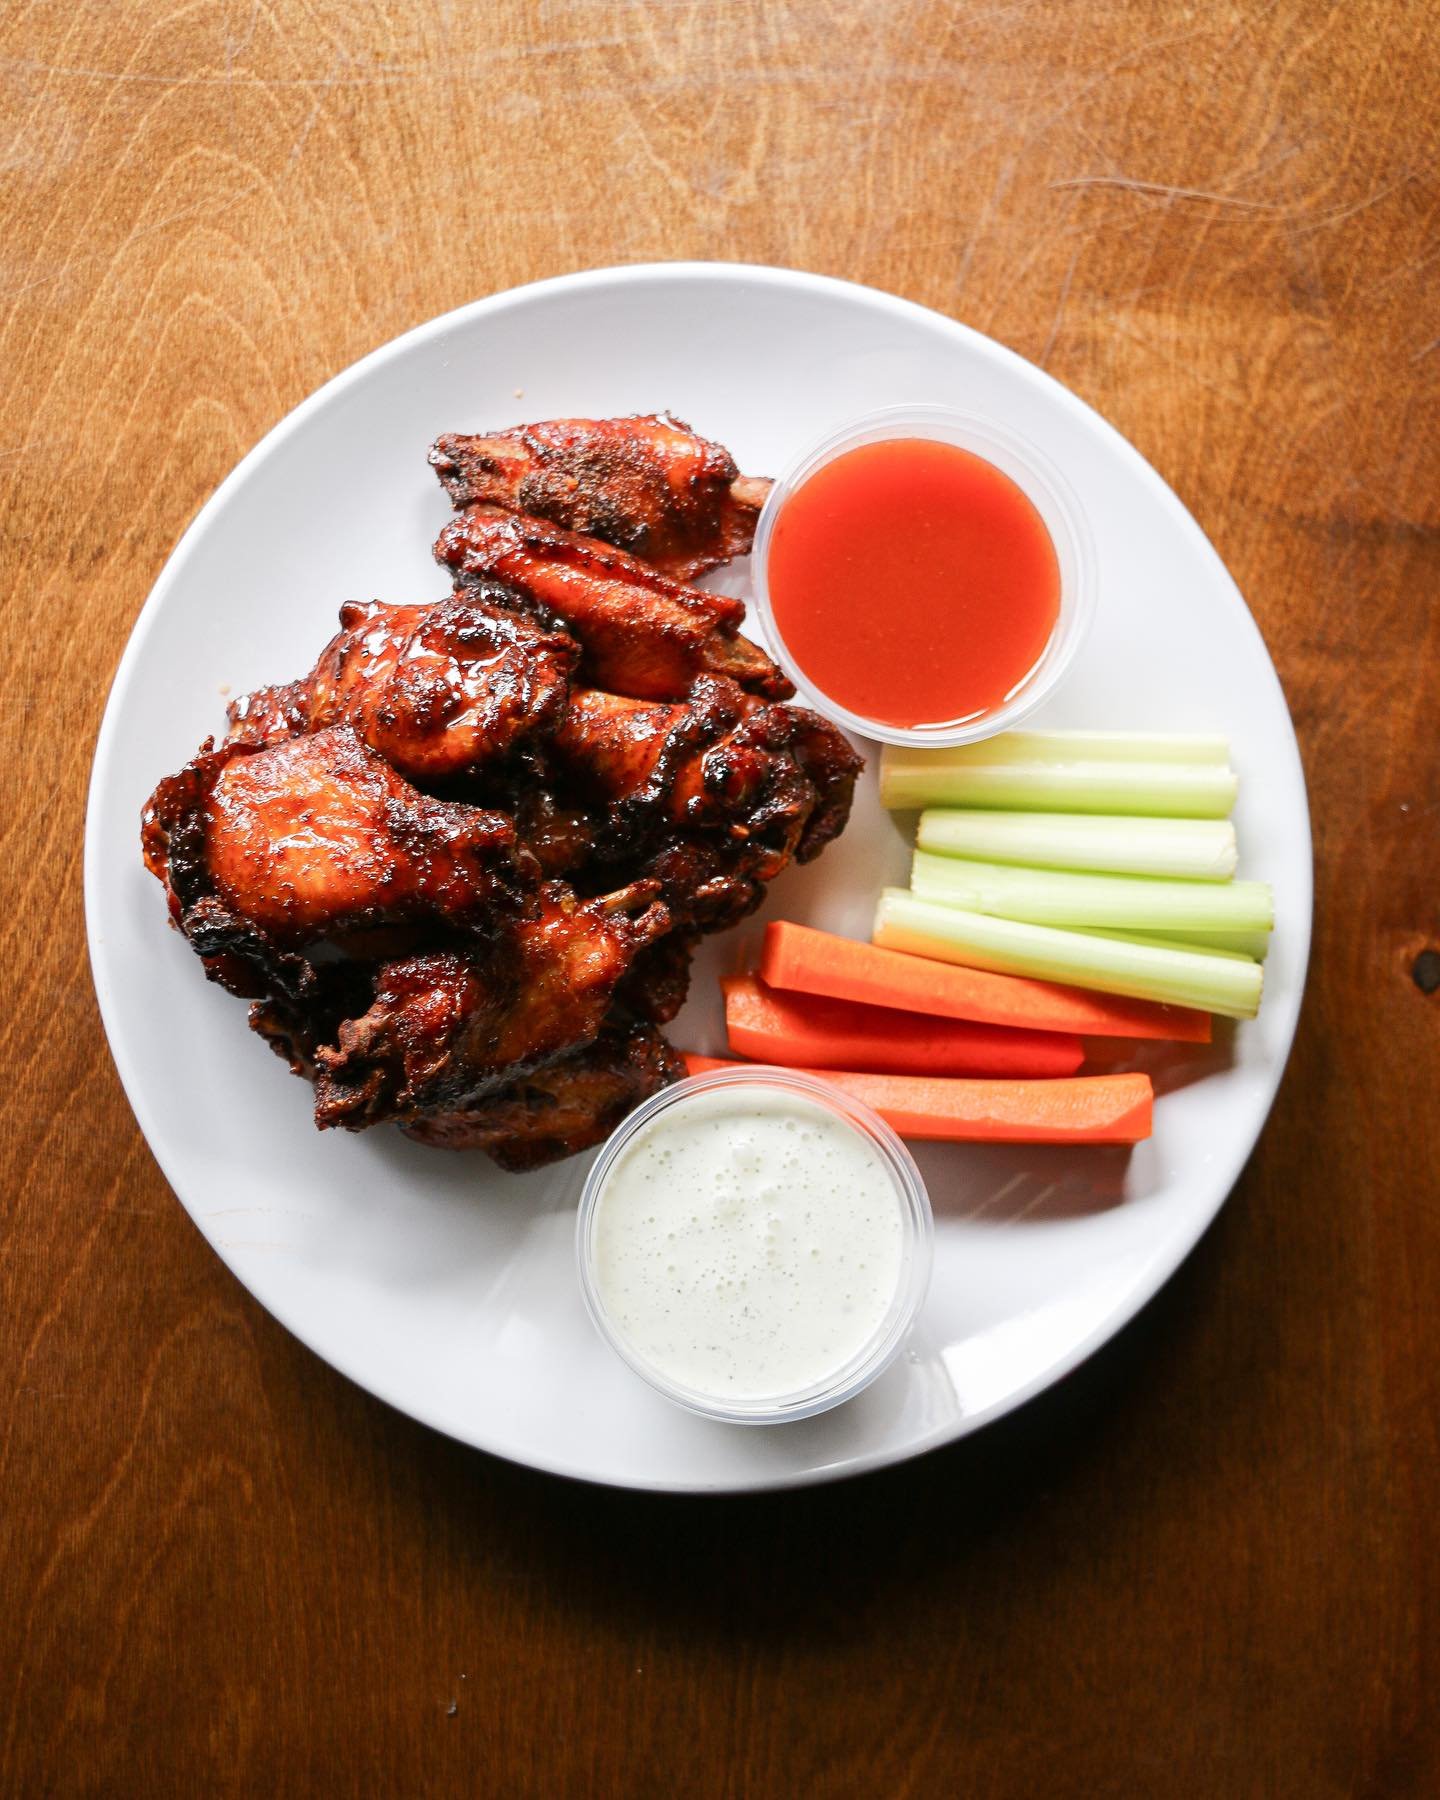 DawgHouse wings are ready to rock your tastebuds!